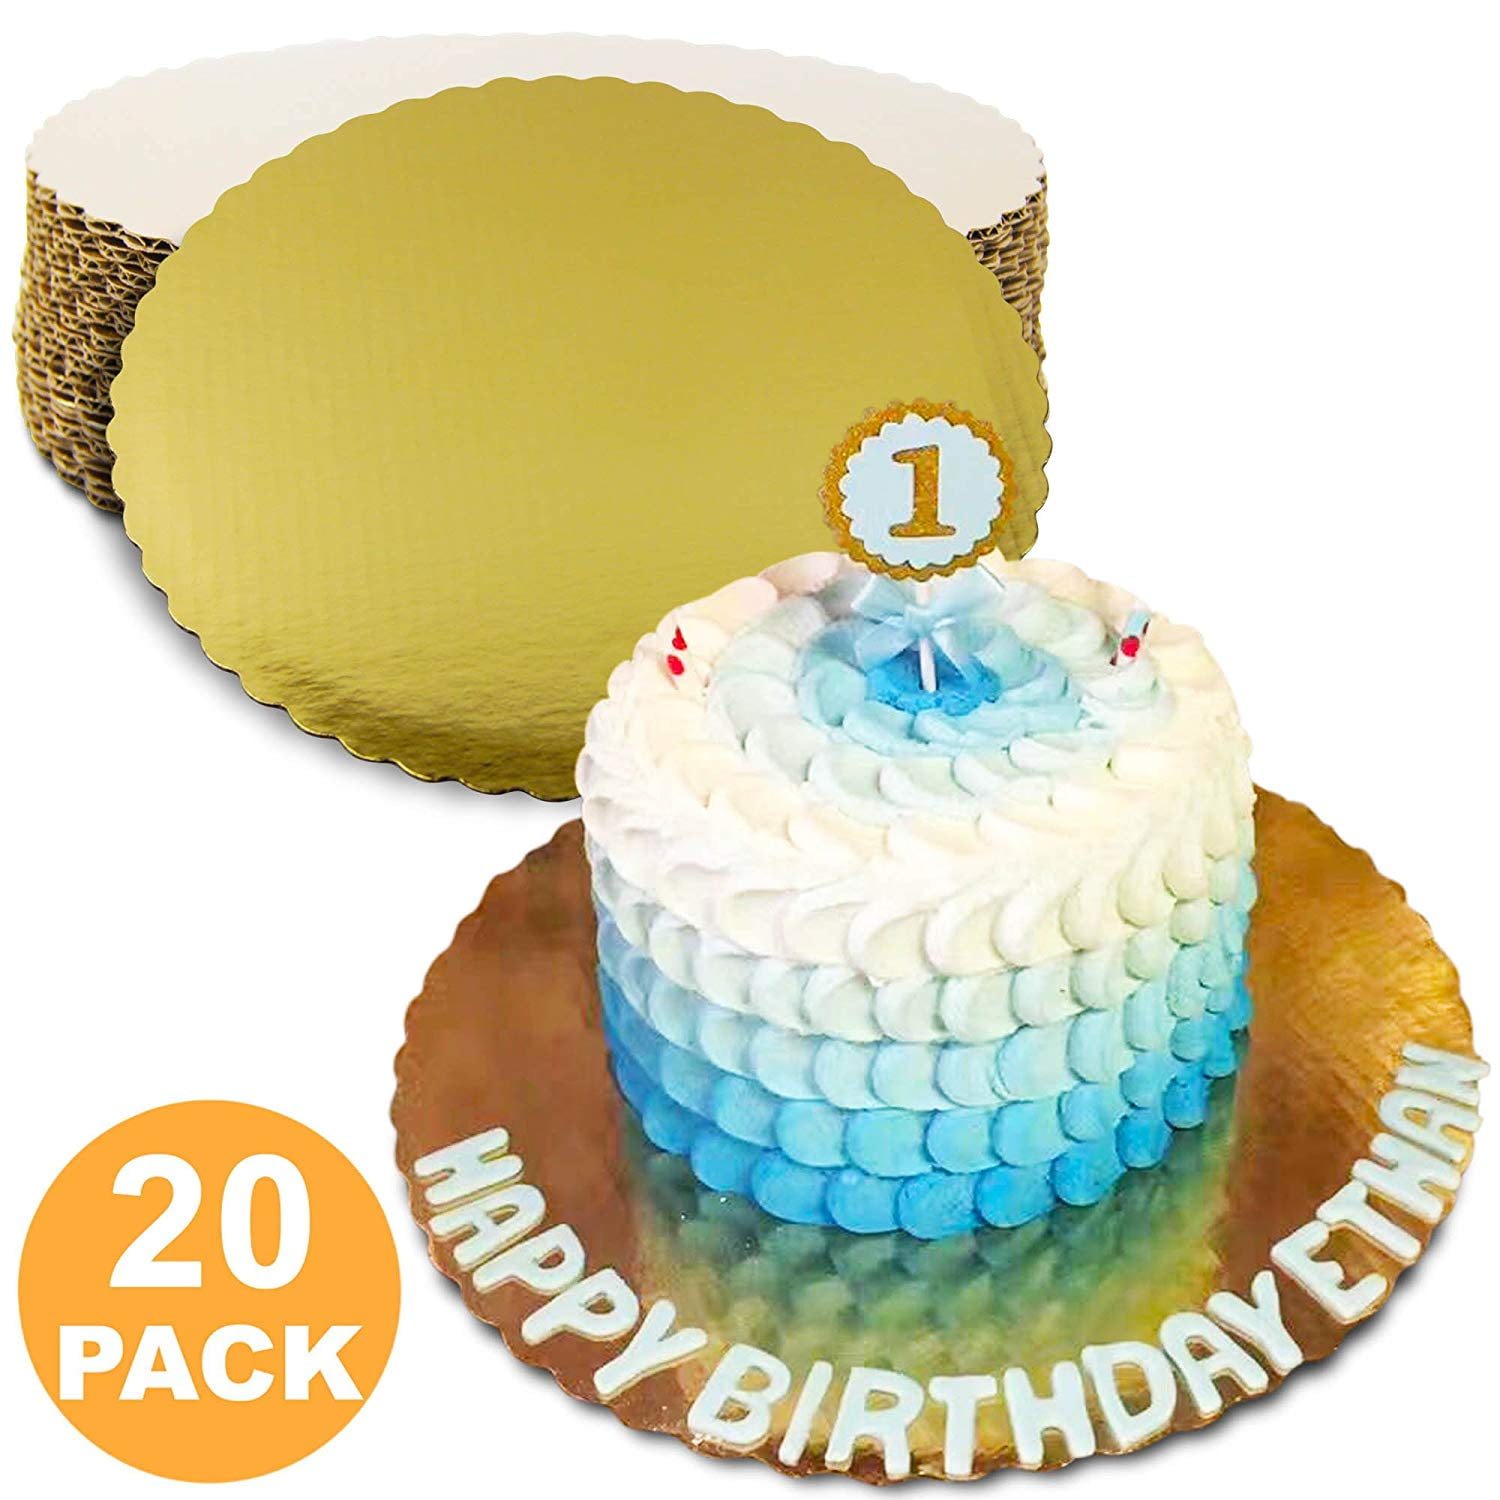 Circle Cardboard Base 8 and 10-Inch 6 Cake Board Rounds Perfect for Cake Decorating 6 of Each Size Set of 18